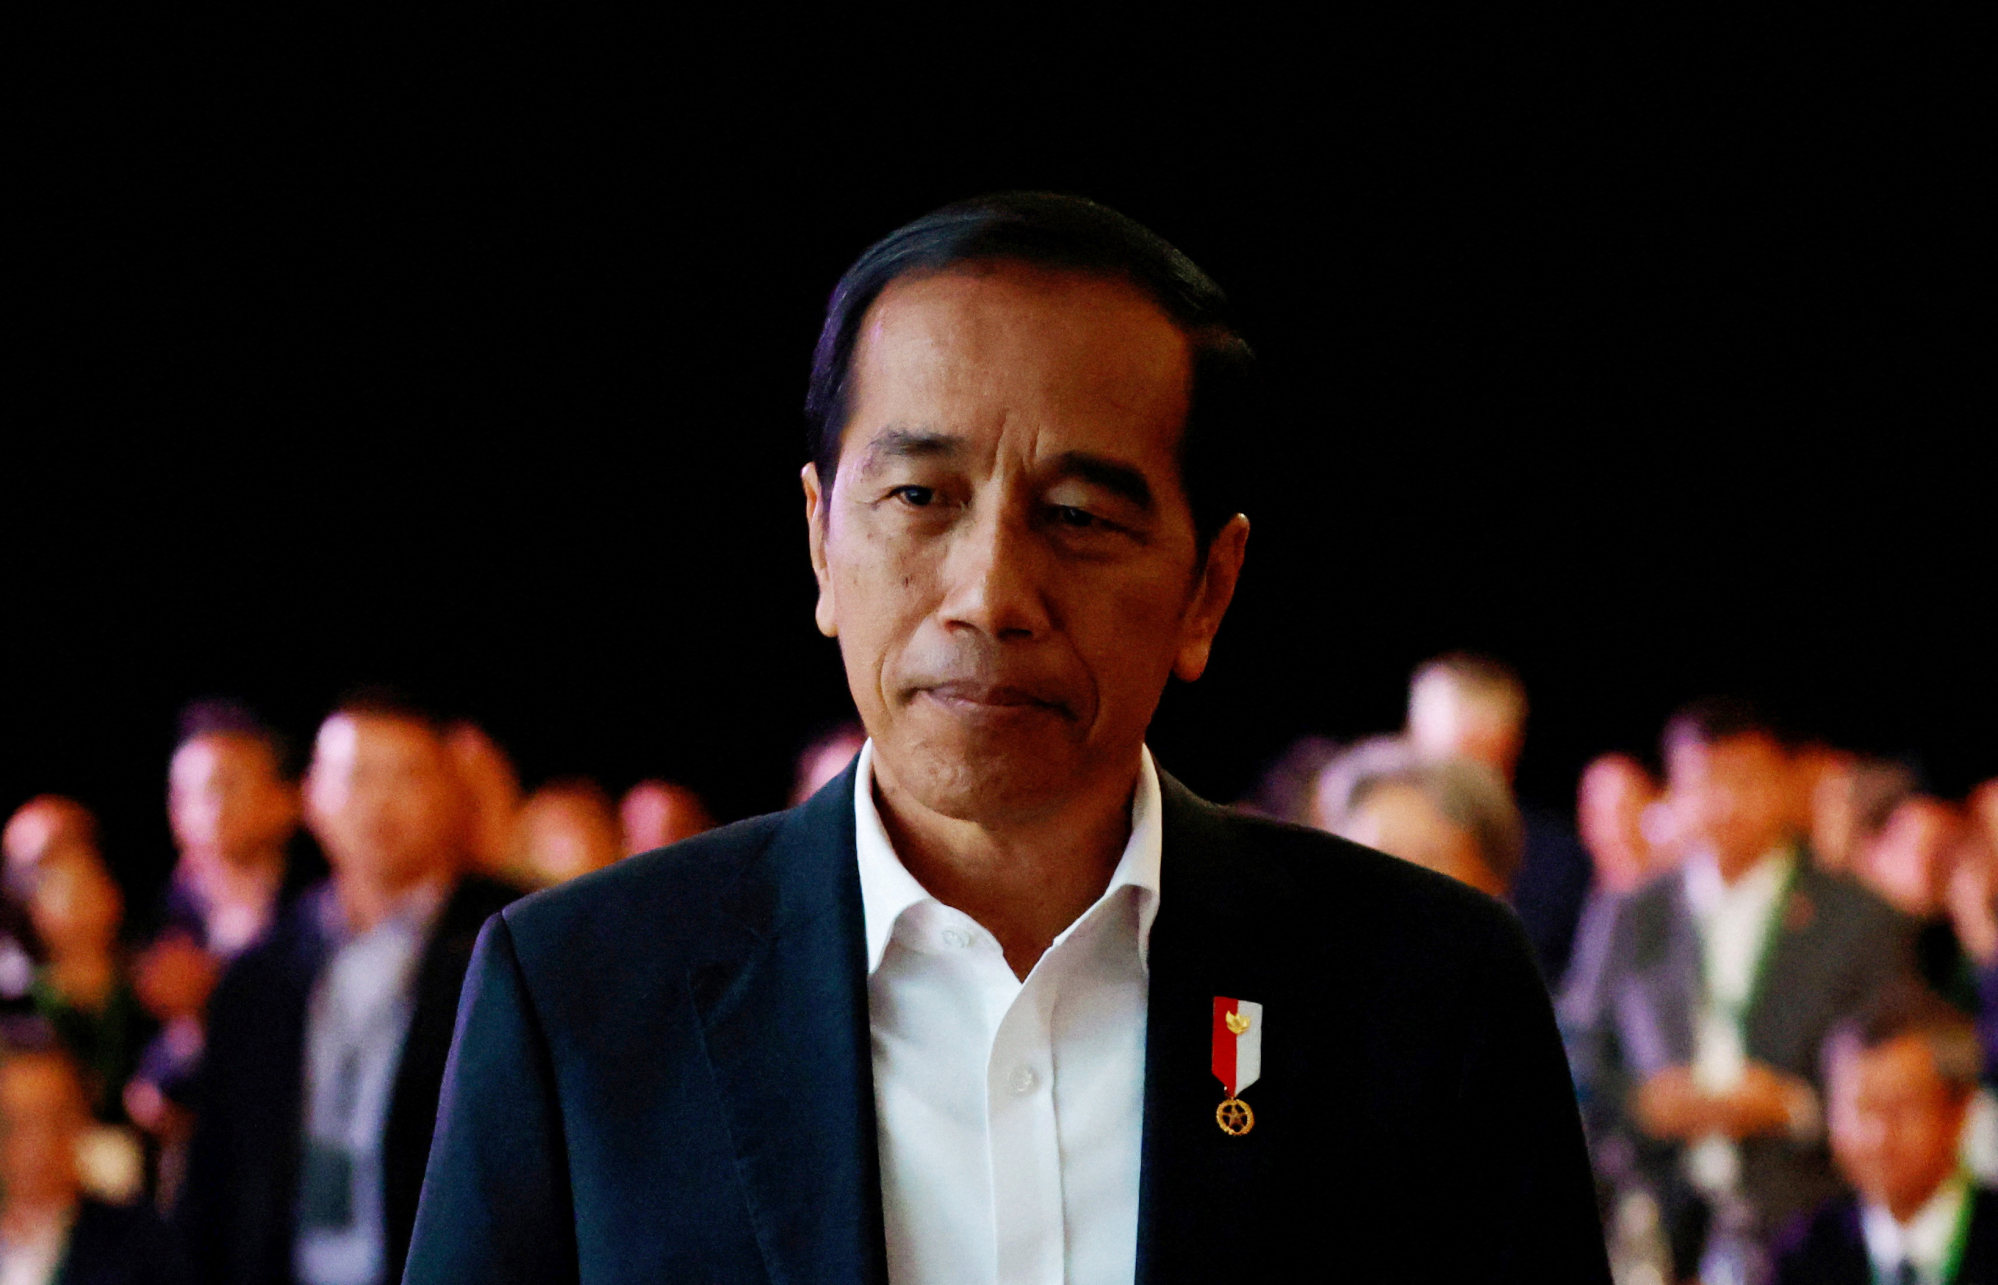 Indonesia’s President Joko Widodo takes the stage to speak about the planned new capital Nusantara, at conference in Singapore. Photo: Reuters